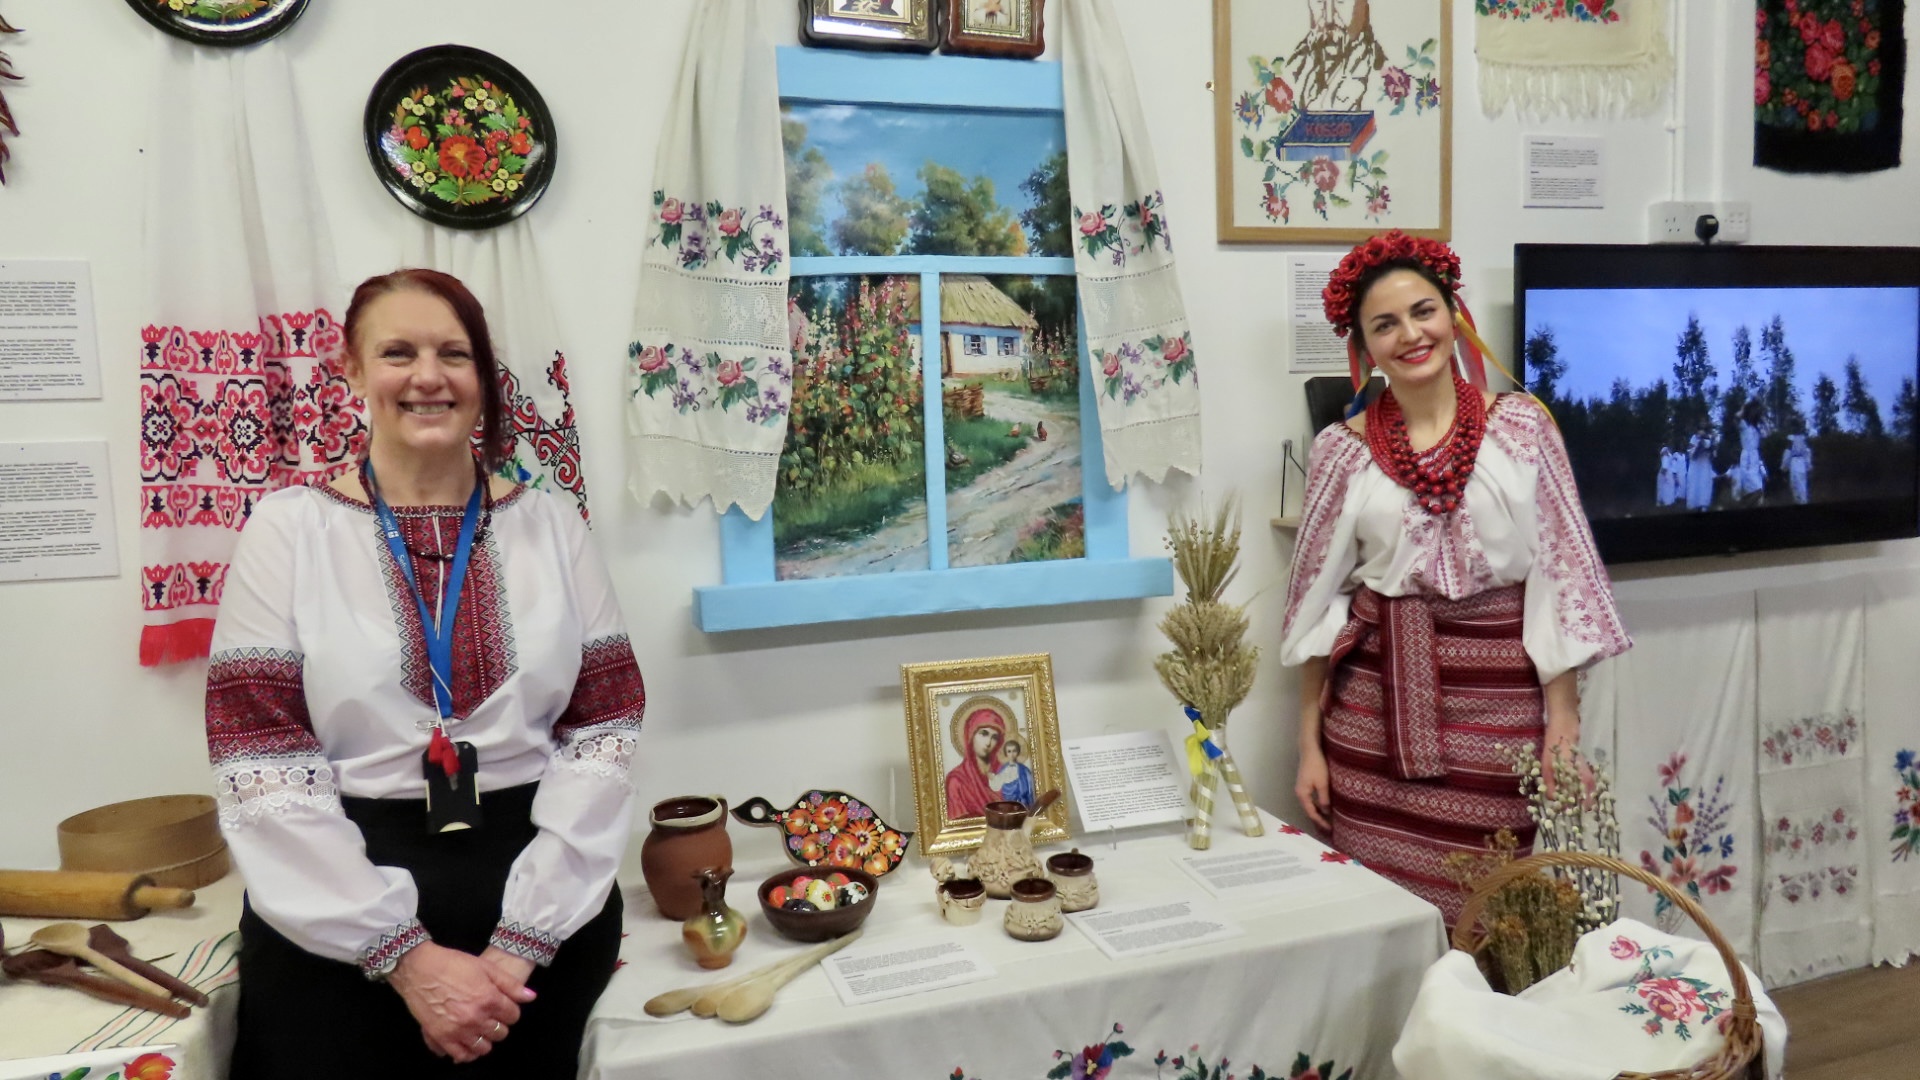 Visitors enjoyed the Ukrainian Day Celebrations at The Atkinson in Southport. Joanne Chamberlain (left) and Vita Mahlovana (right). Photo by Andrew Brown Stand Up For Southport